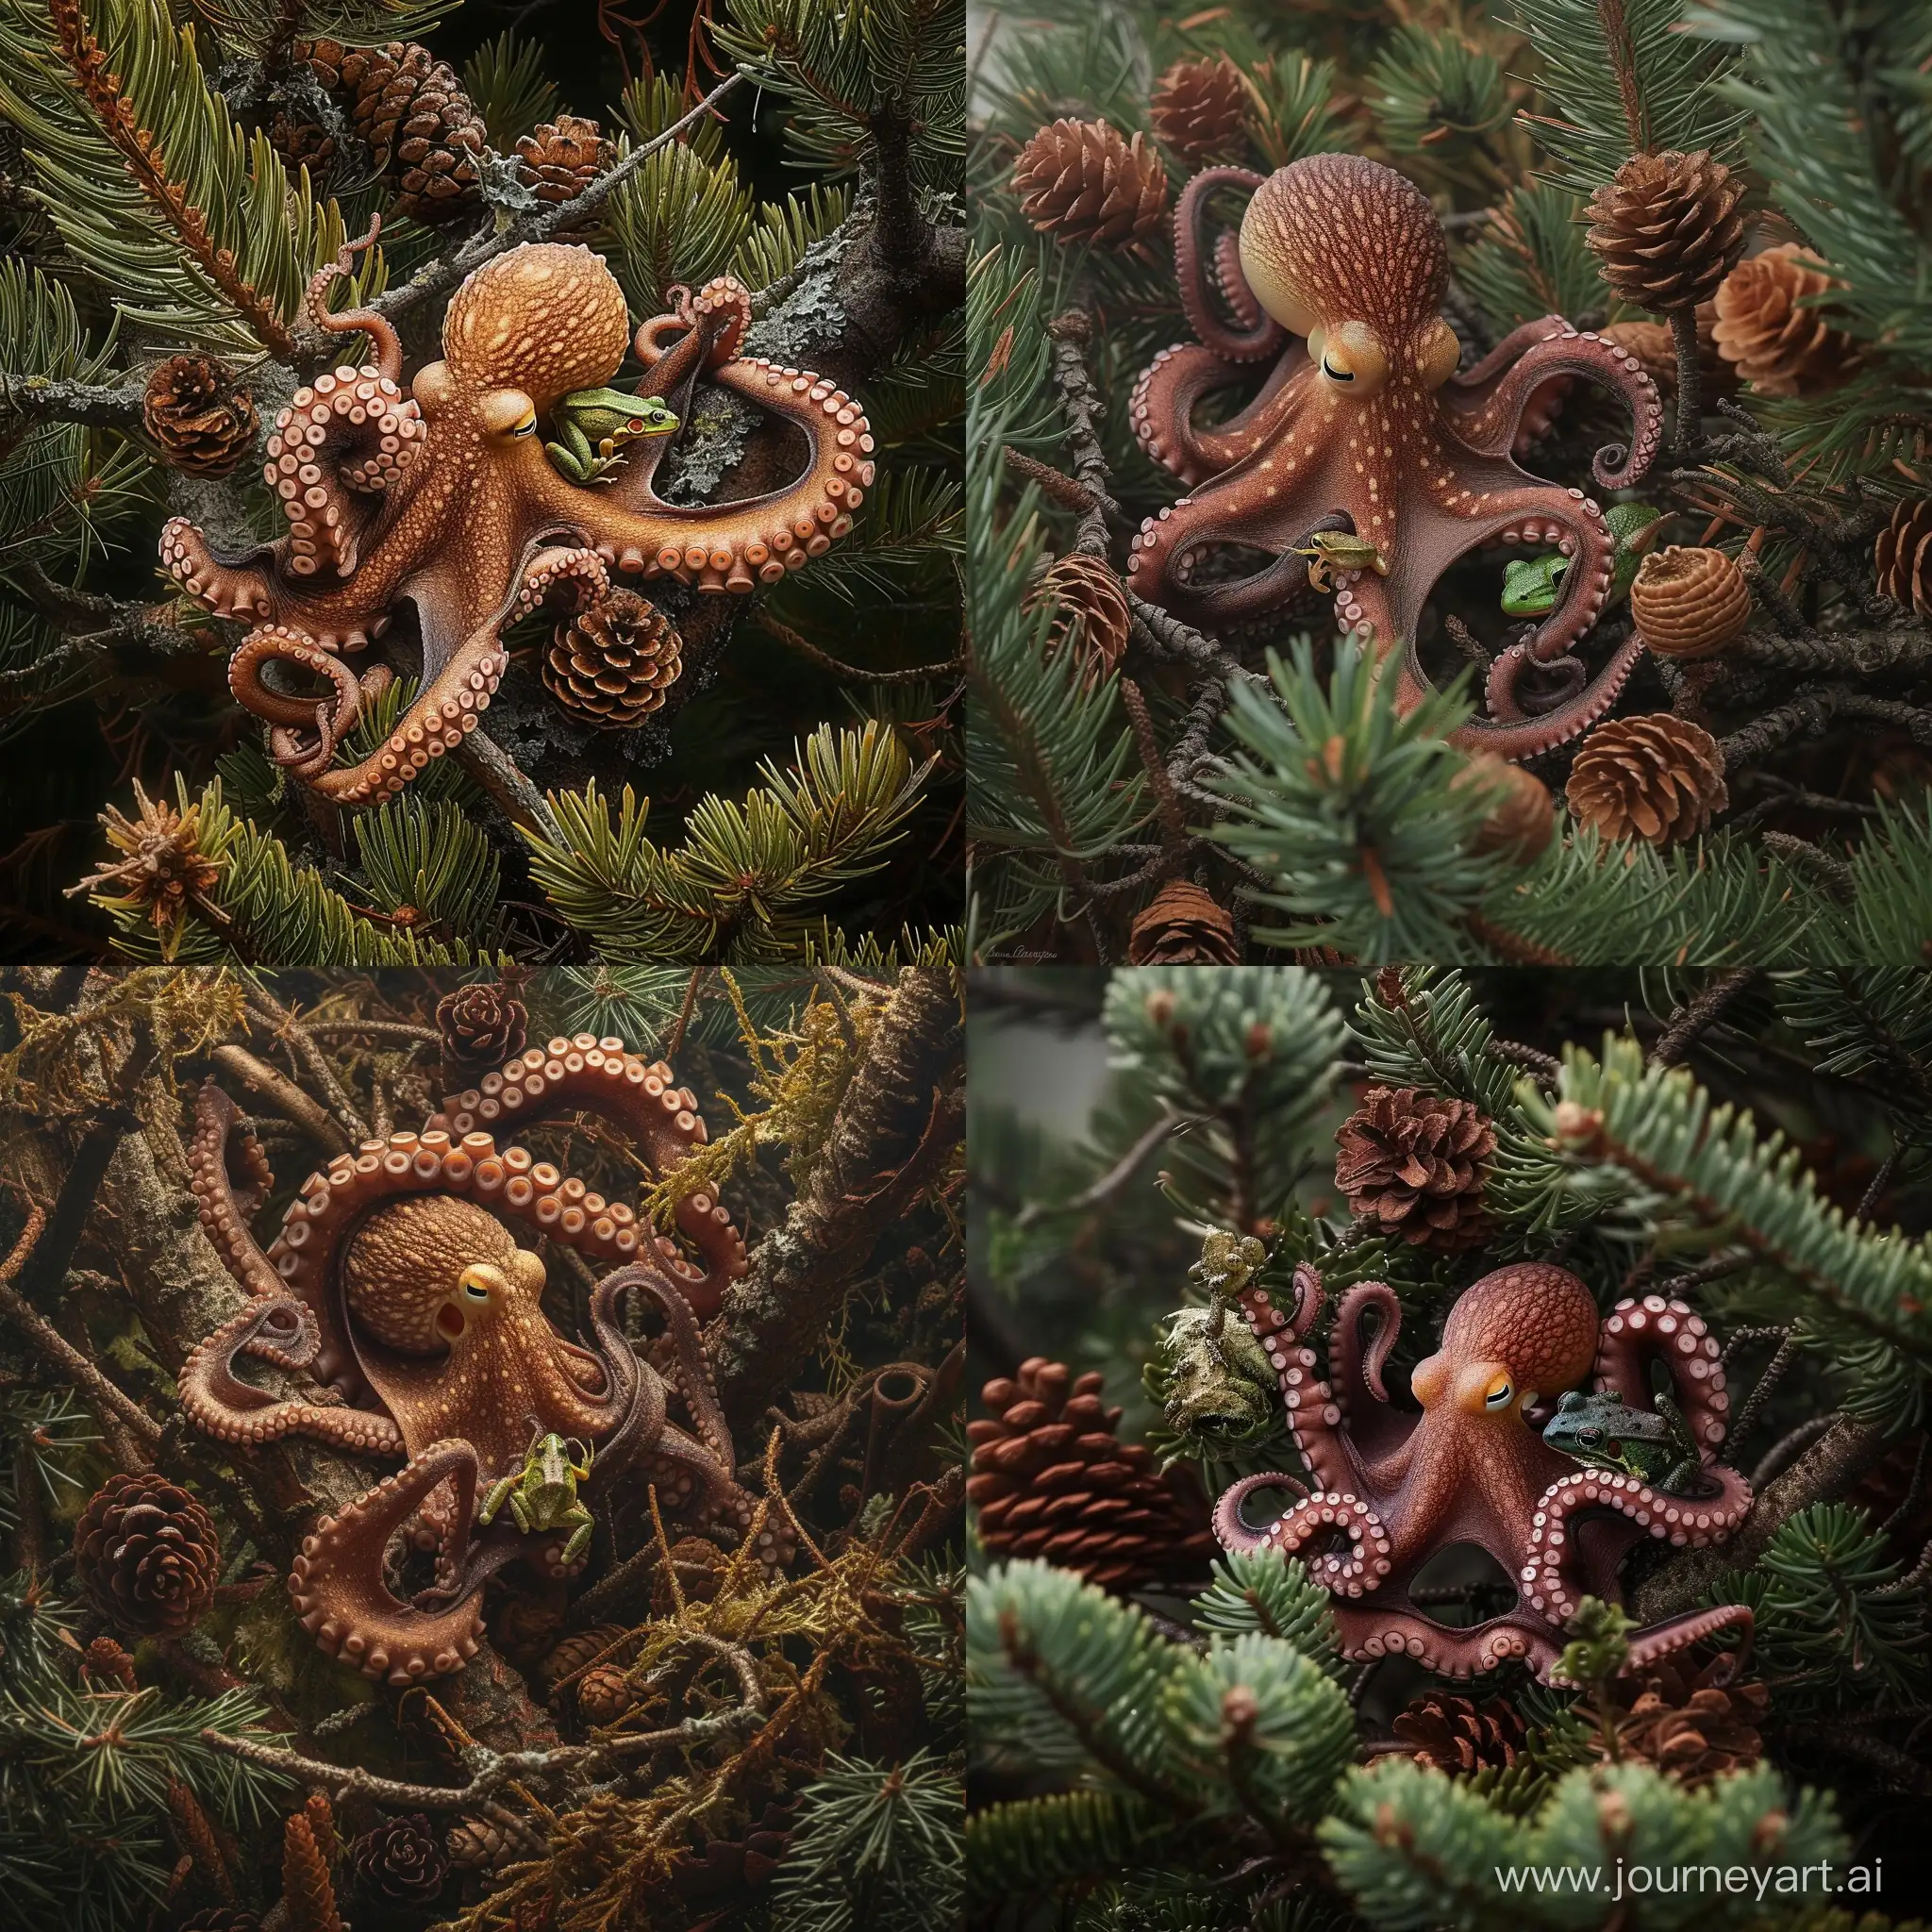 Rare-Small-Brown-Octopus-Captures-Frog-in-Pine-Rainforest